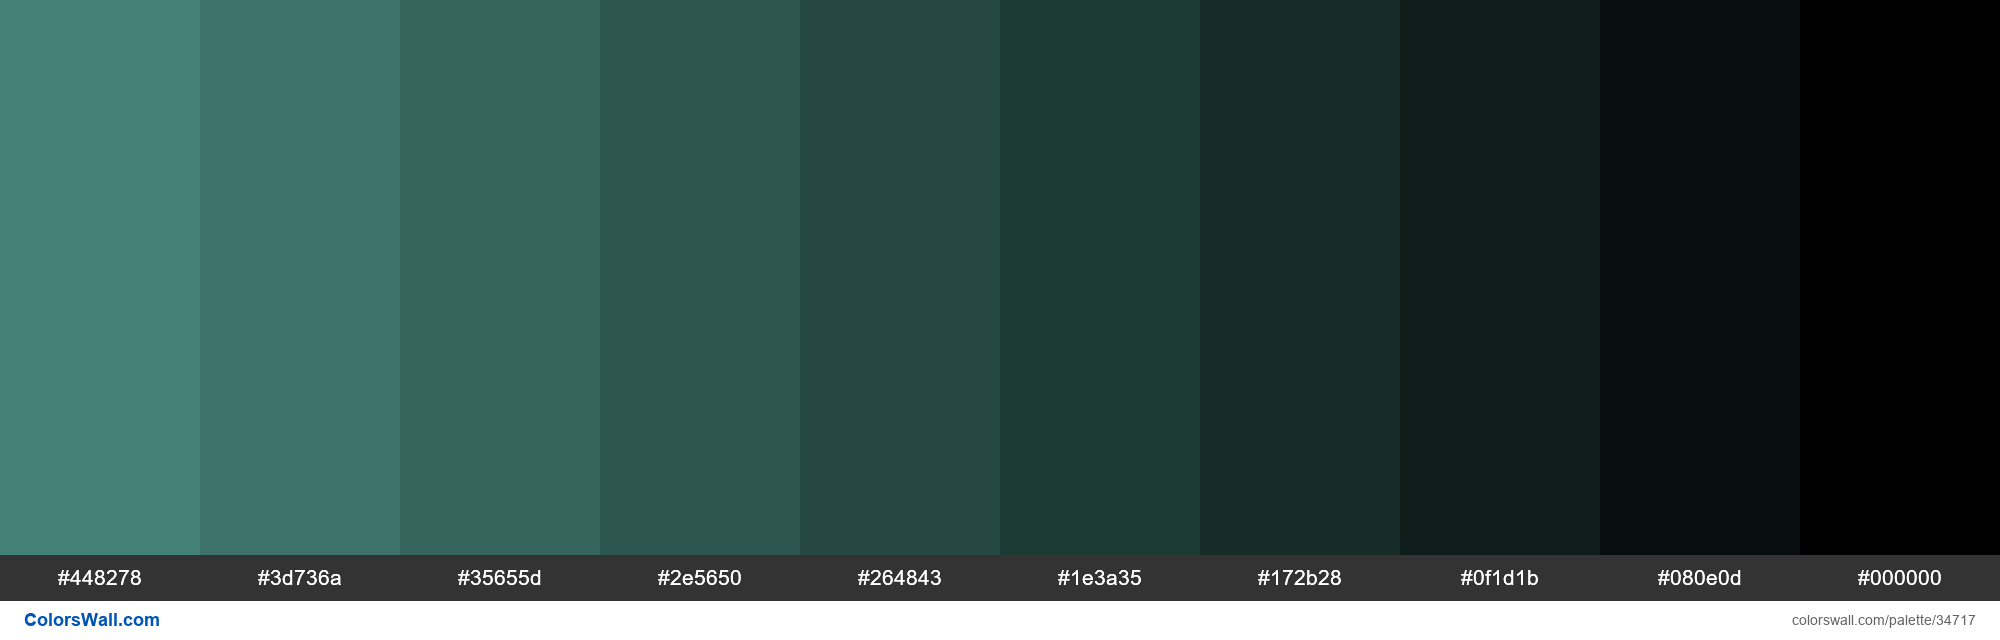 Shades XKCD Color dusty teal #4c9085 hex colors palette - ColorsWall